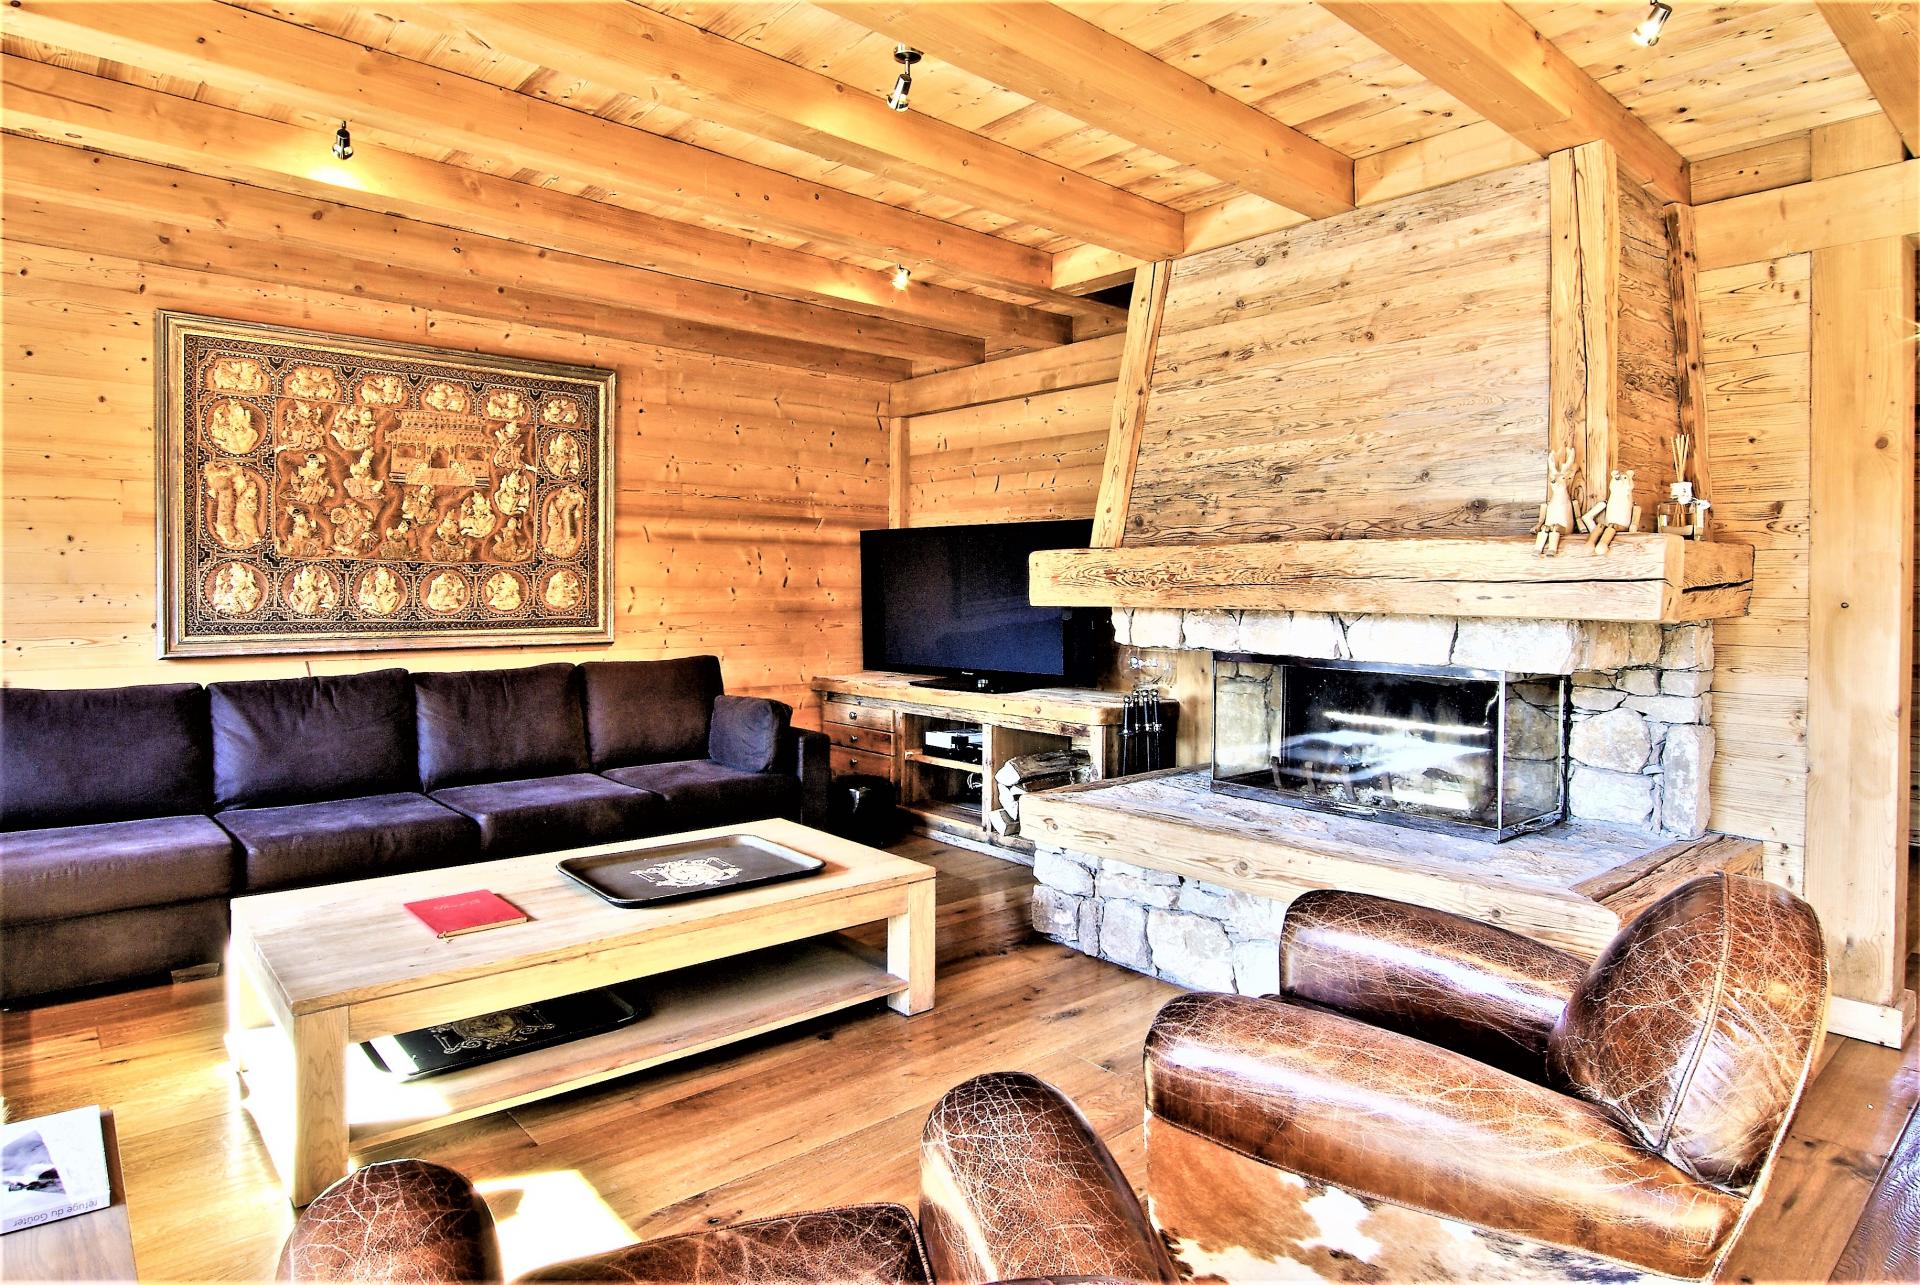 THE FIREPLACE AND COMFORTABLE SOFAS TO RELAX AFTER SKIING